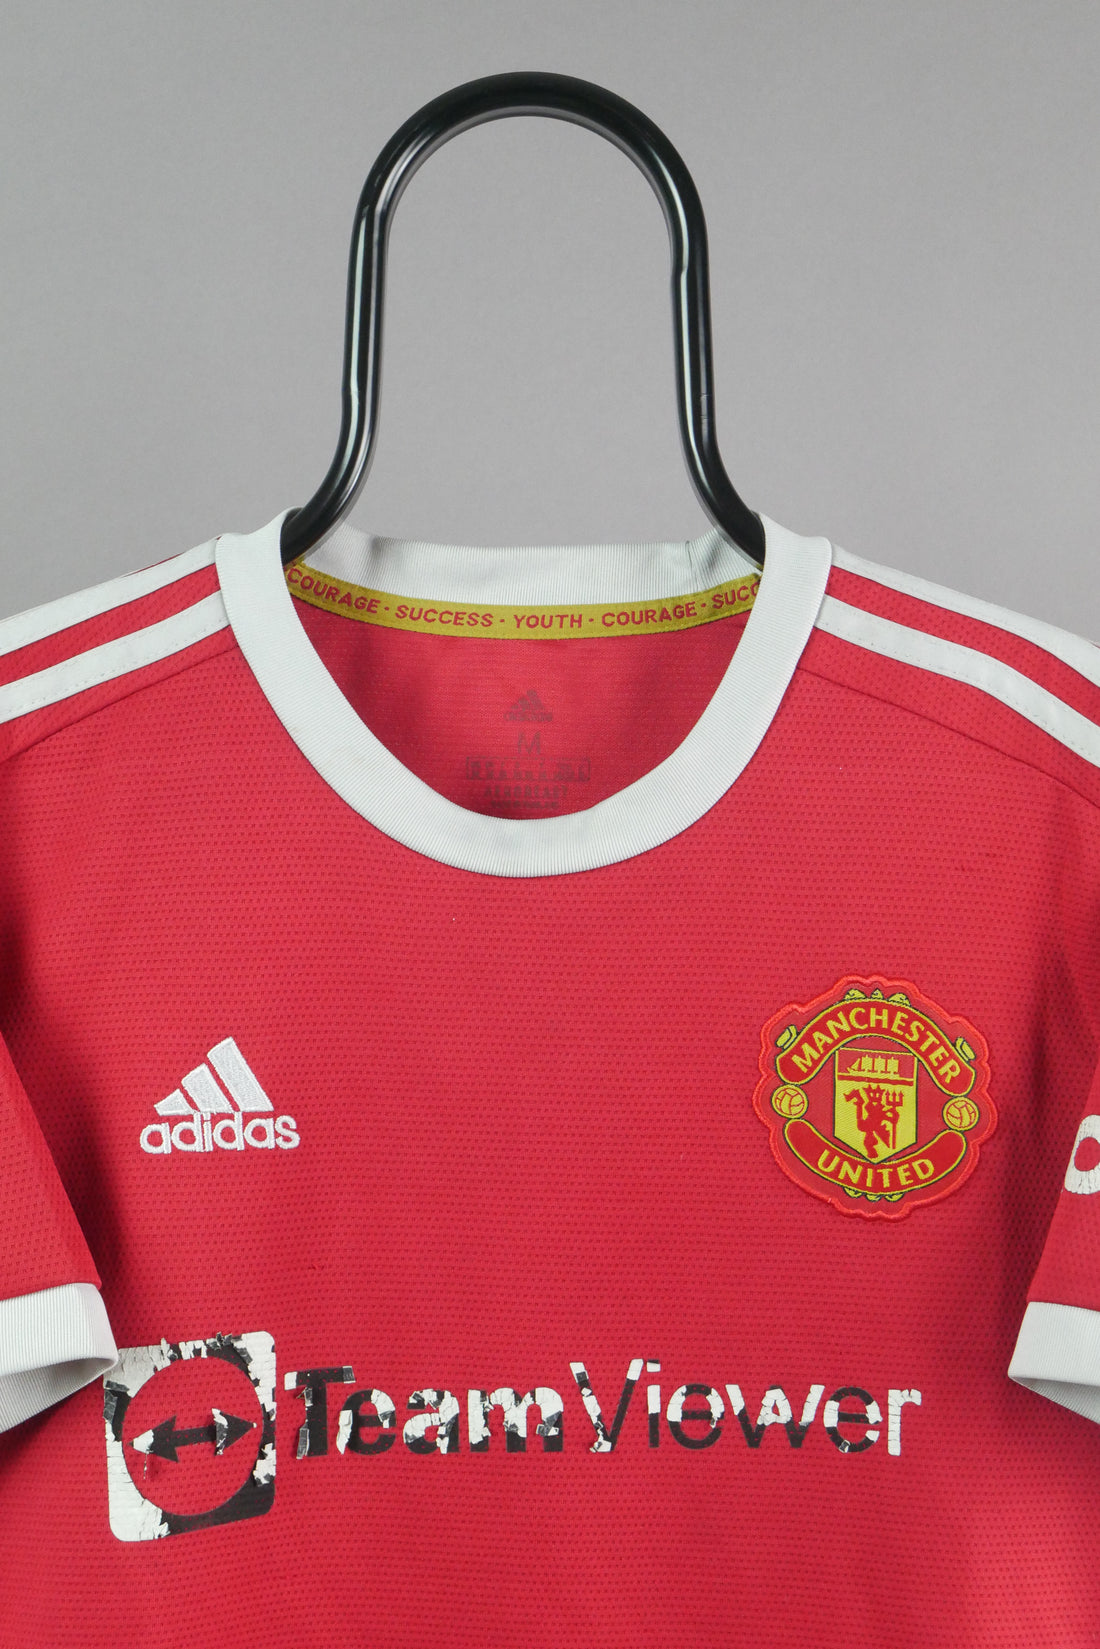 The Adidas Manchester United Football T-Shirt (M)